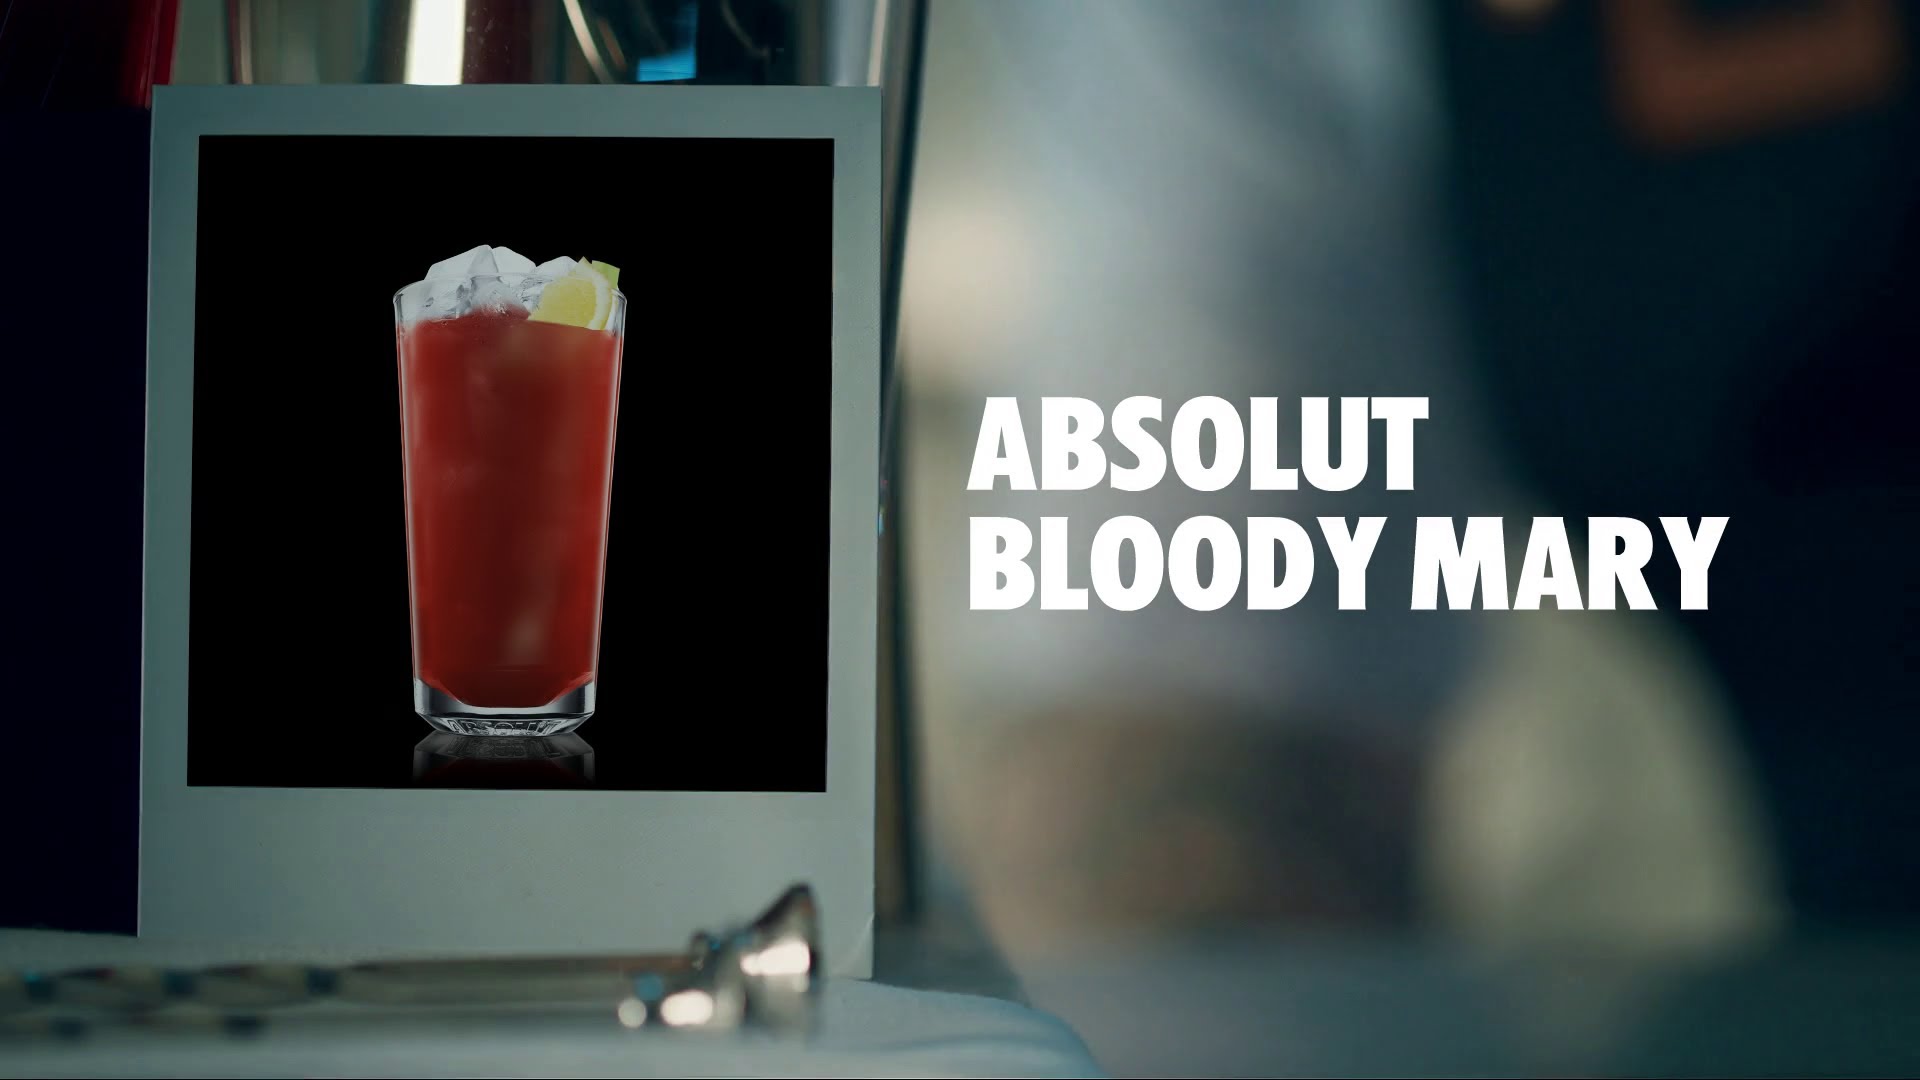 How to Make a Bloody Mary